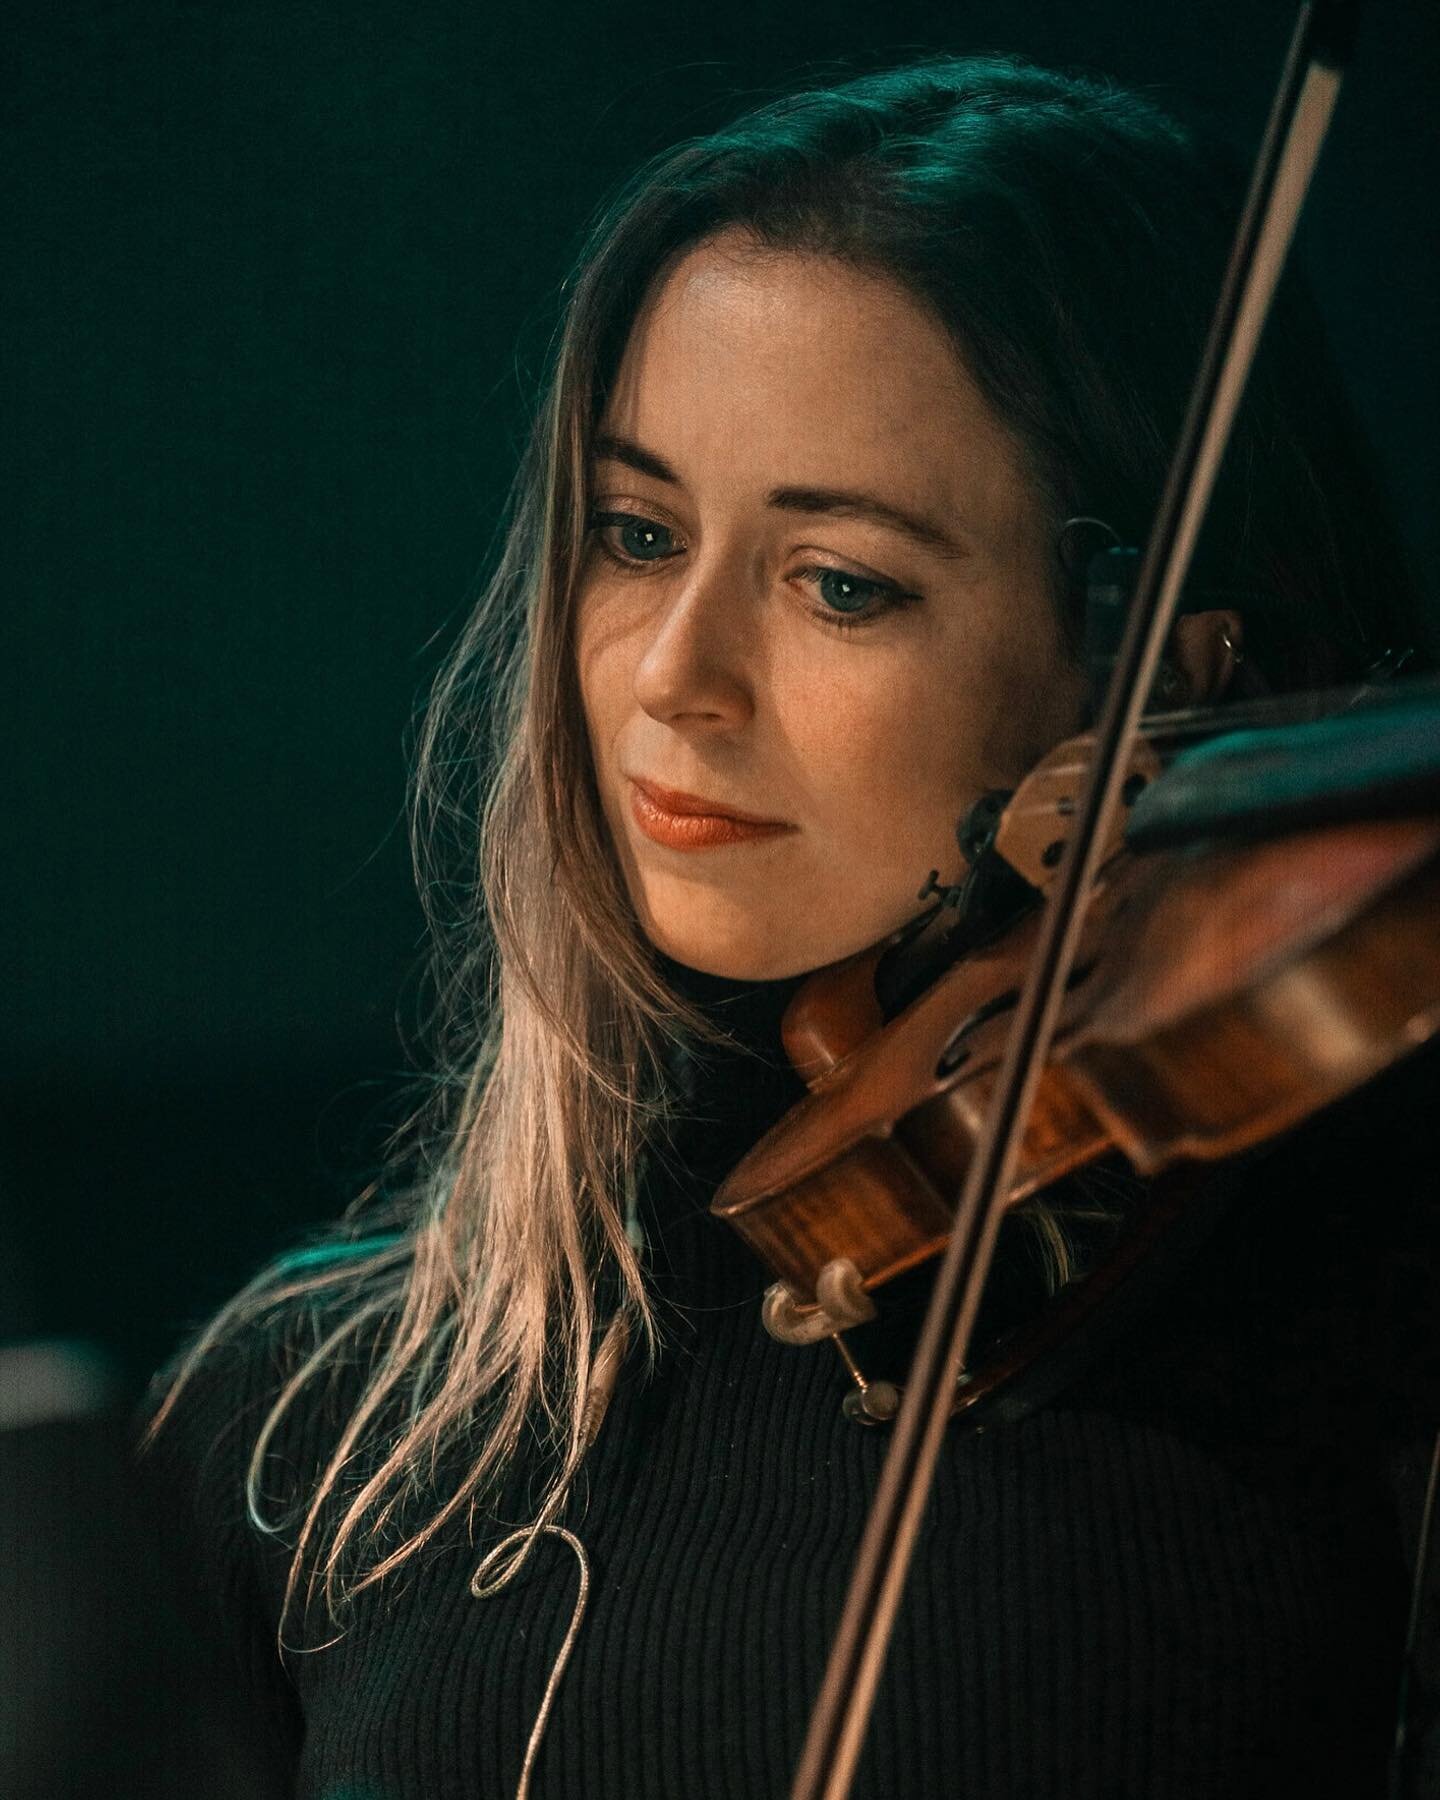 a rare photo of me playing the violin that doesn&rsquo;t feature 15+ chins from an epic few nights on stage with the loveliest group of people ❤️&zwj;🔥

thank u @pwp.visuals @reimagine_uk @thesteelyardldn 🛠️